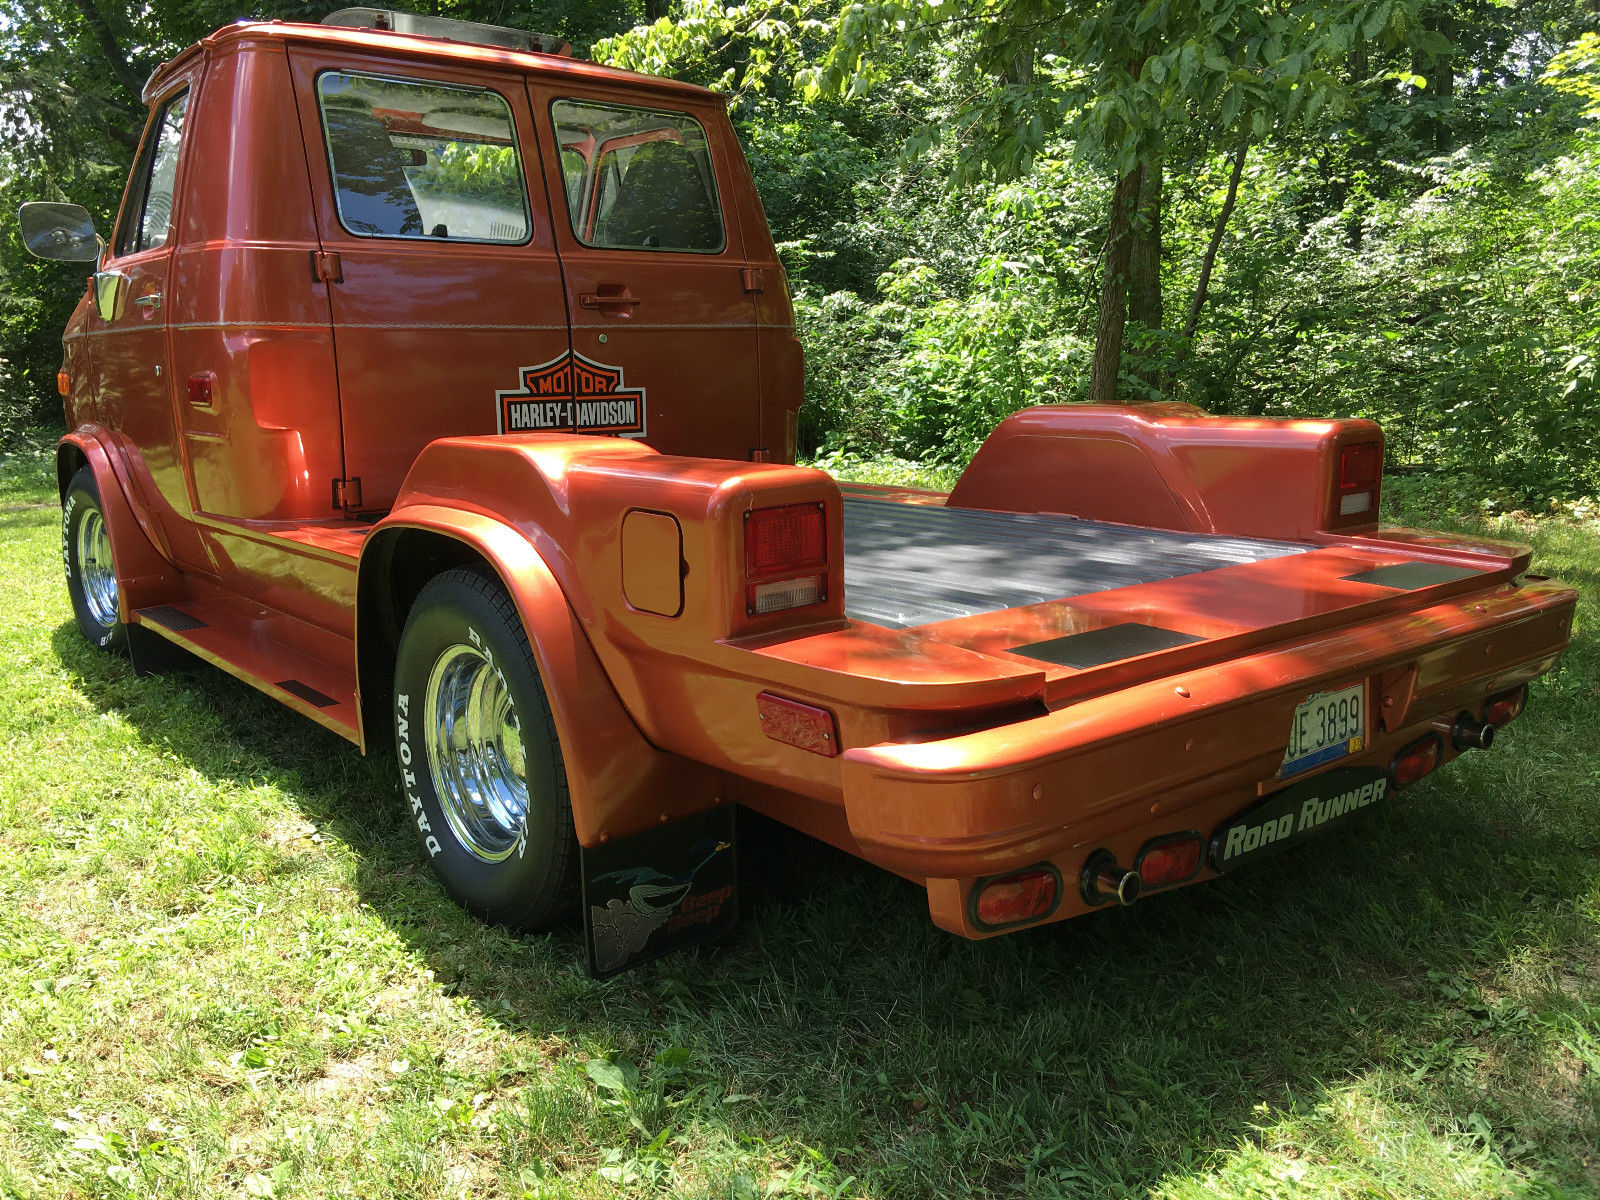 Is It Just Us, Or Does This 1981 Chevrolet G20 Need A Fifth Wheel And Matching Trailer?